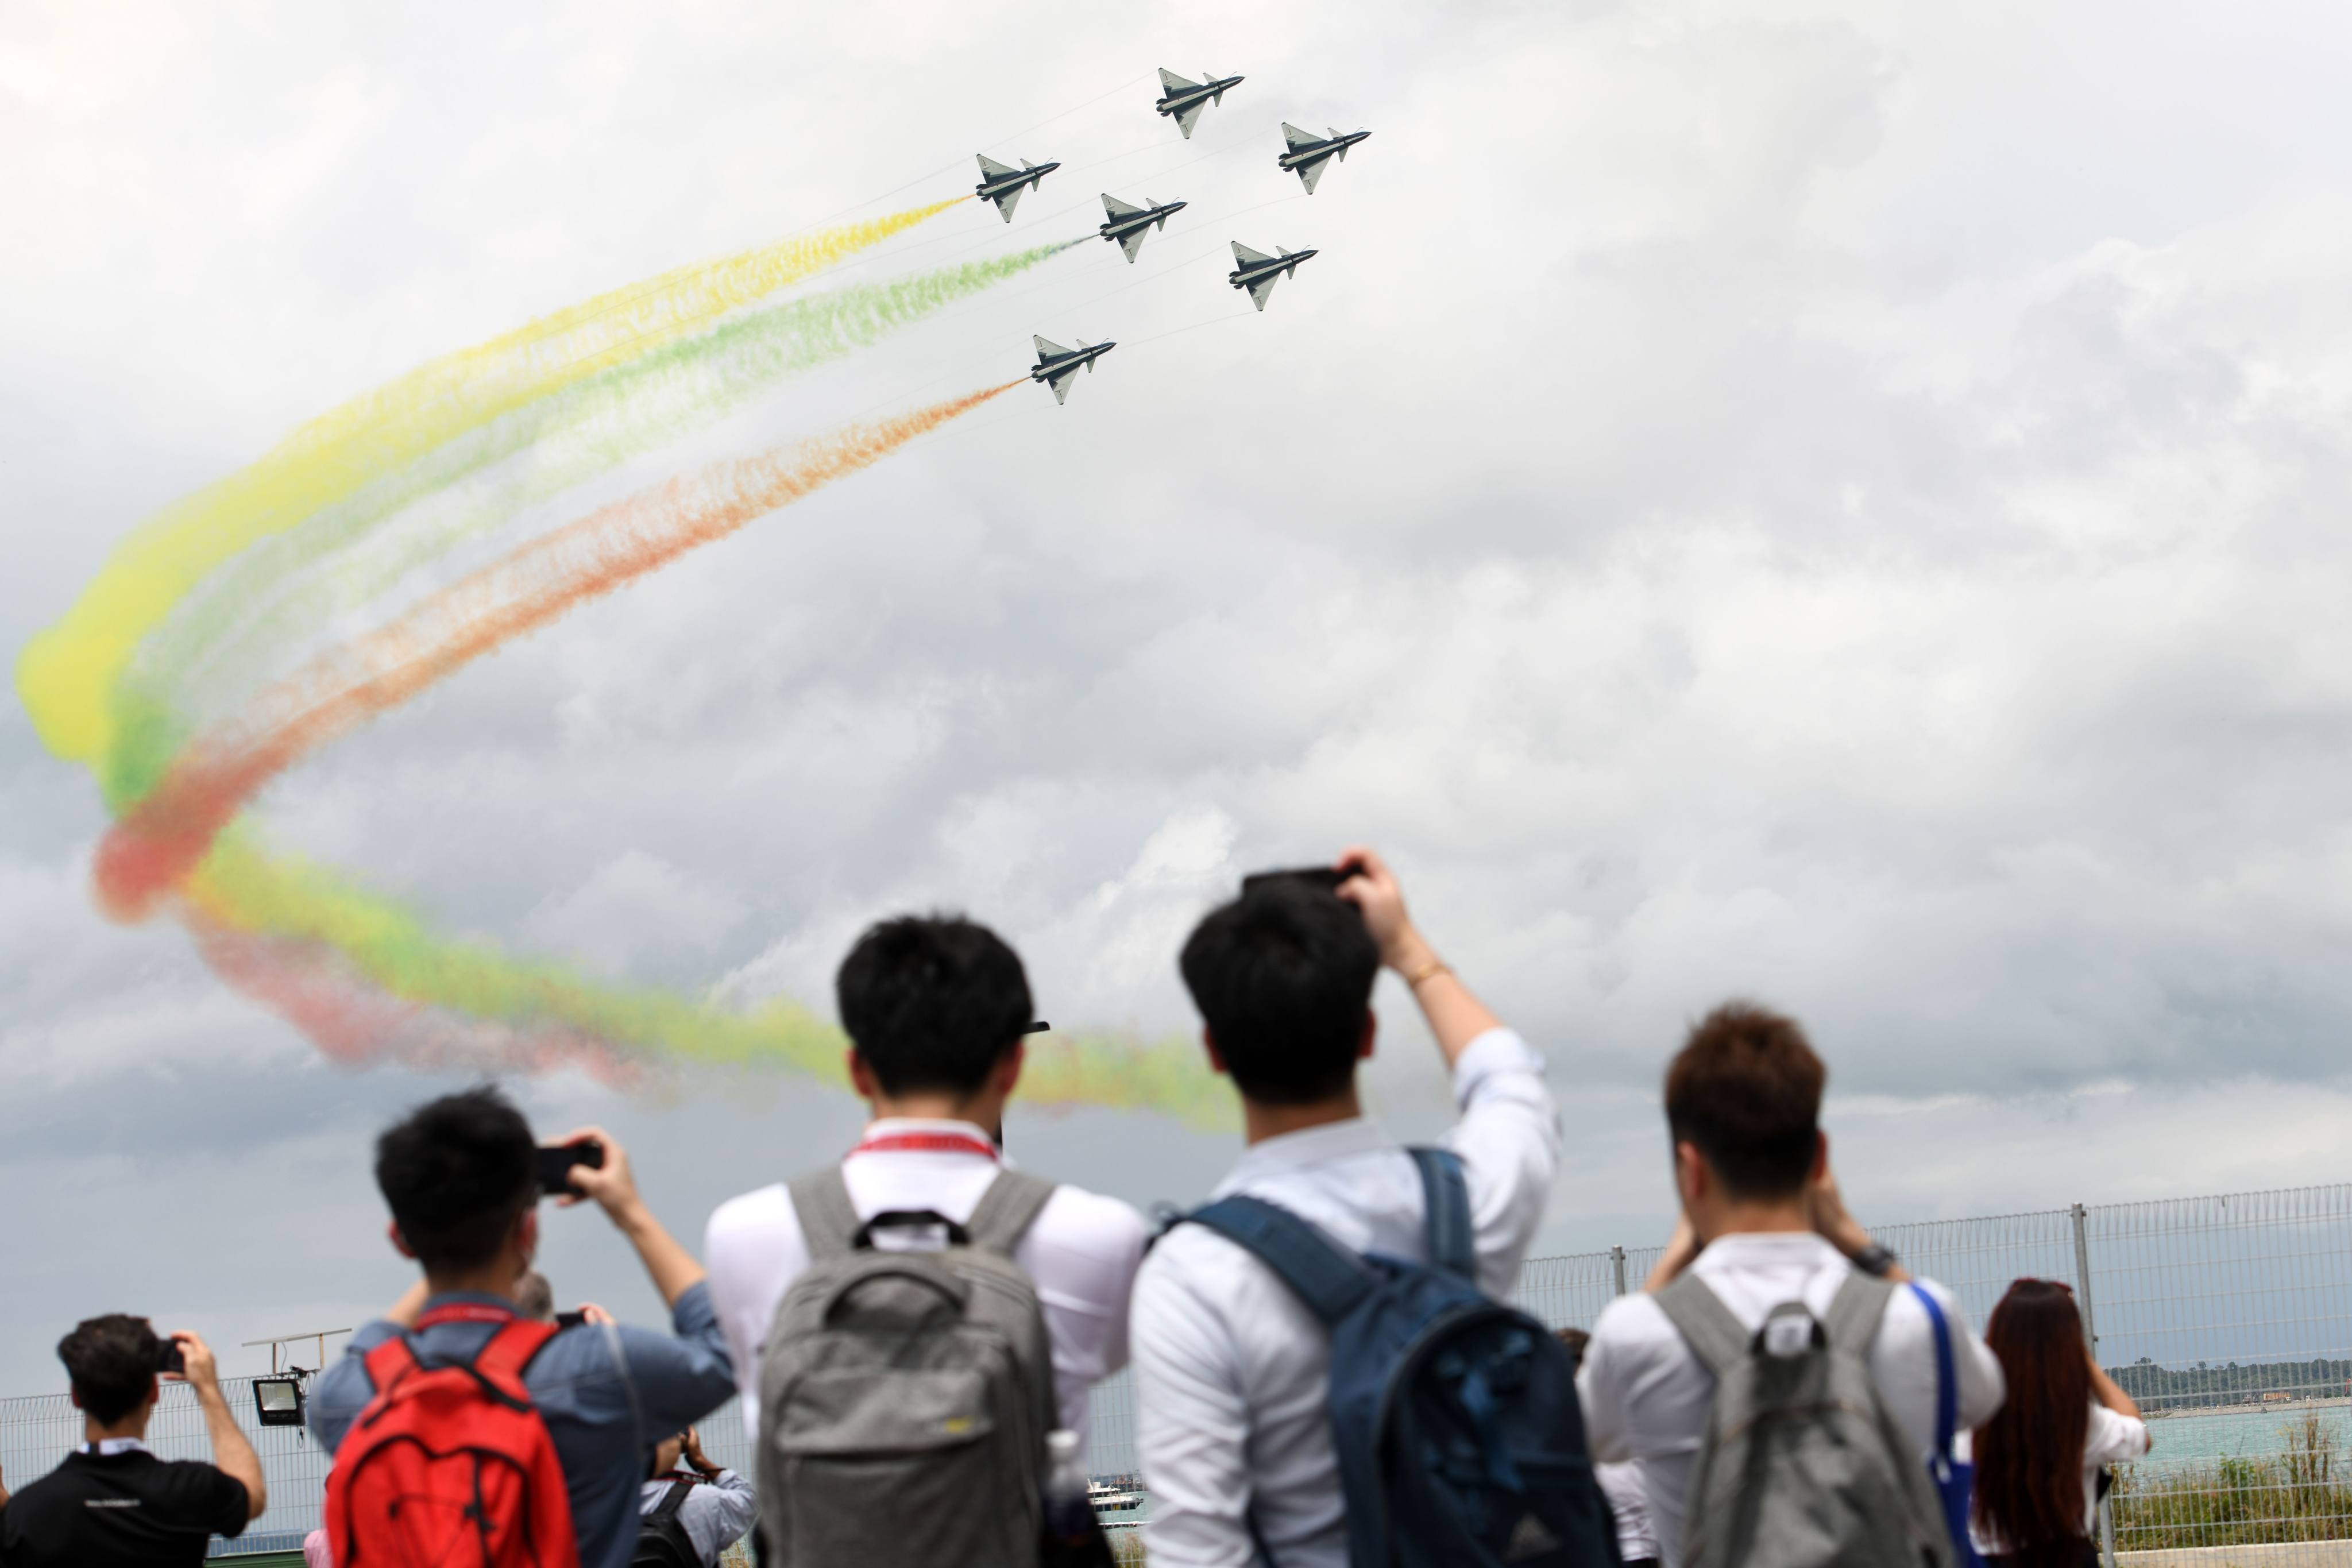 The Chinese People’s Liberation Army Air Force’s Bayi Aerobatic Team fly J-10 fighter jets perform an aerial display during the 2020 Singapore Airshow. Photo: AFP